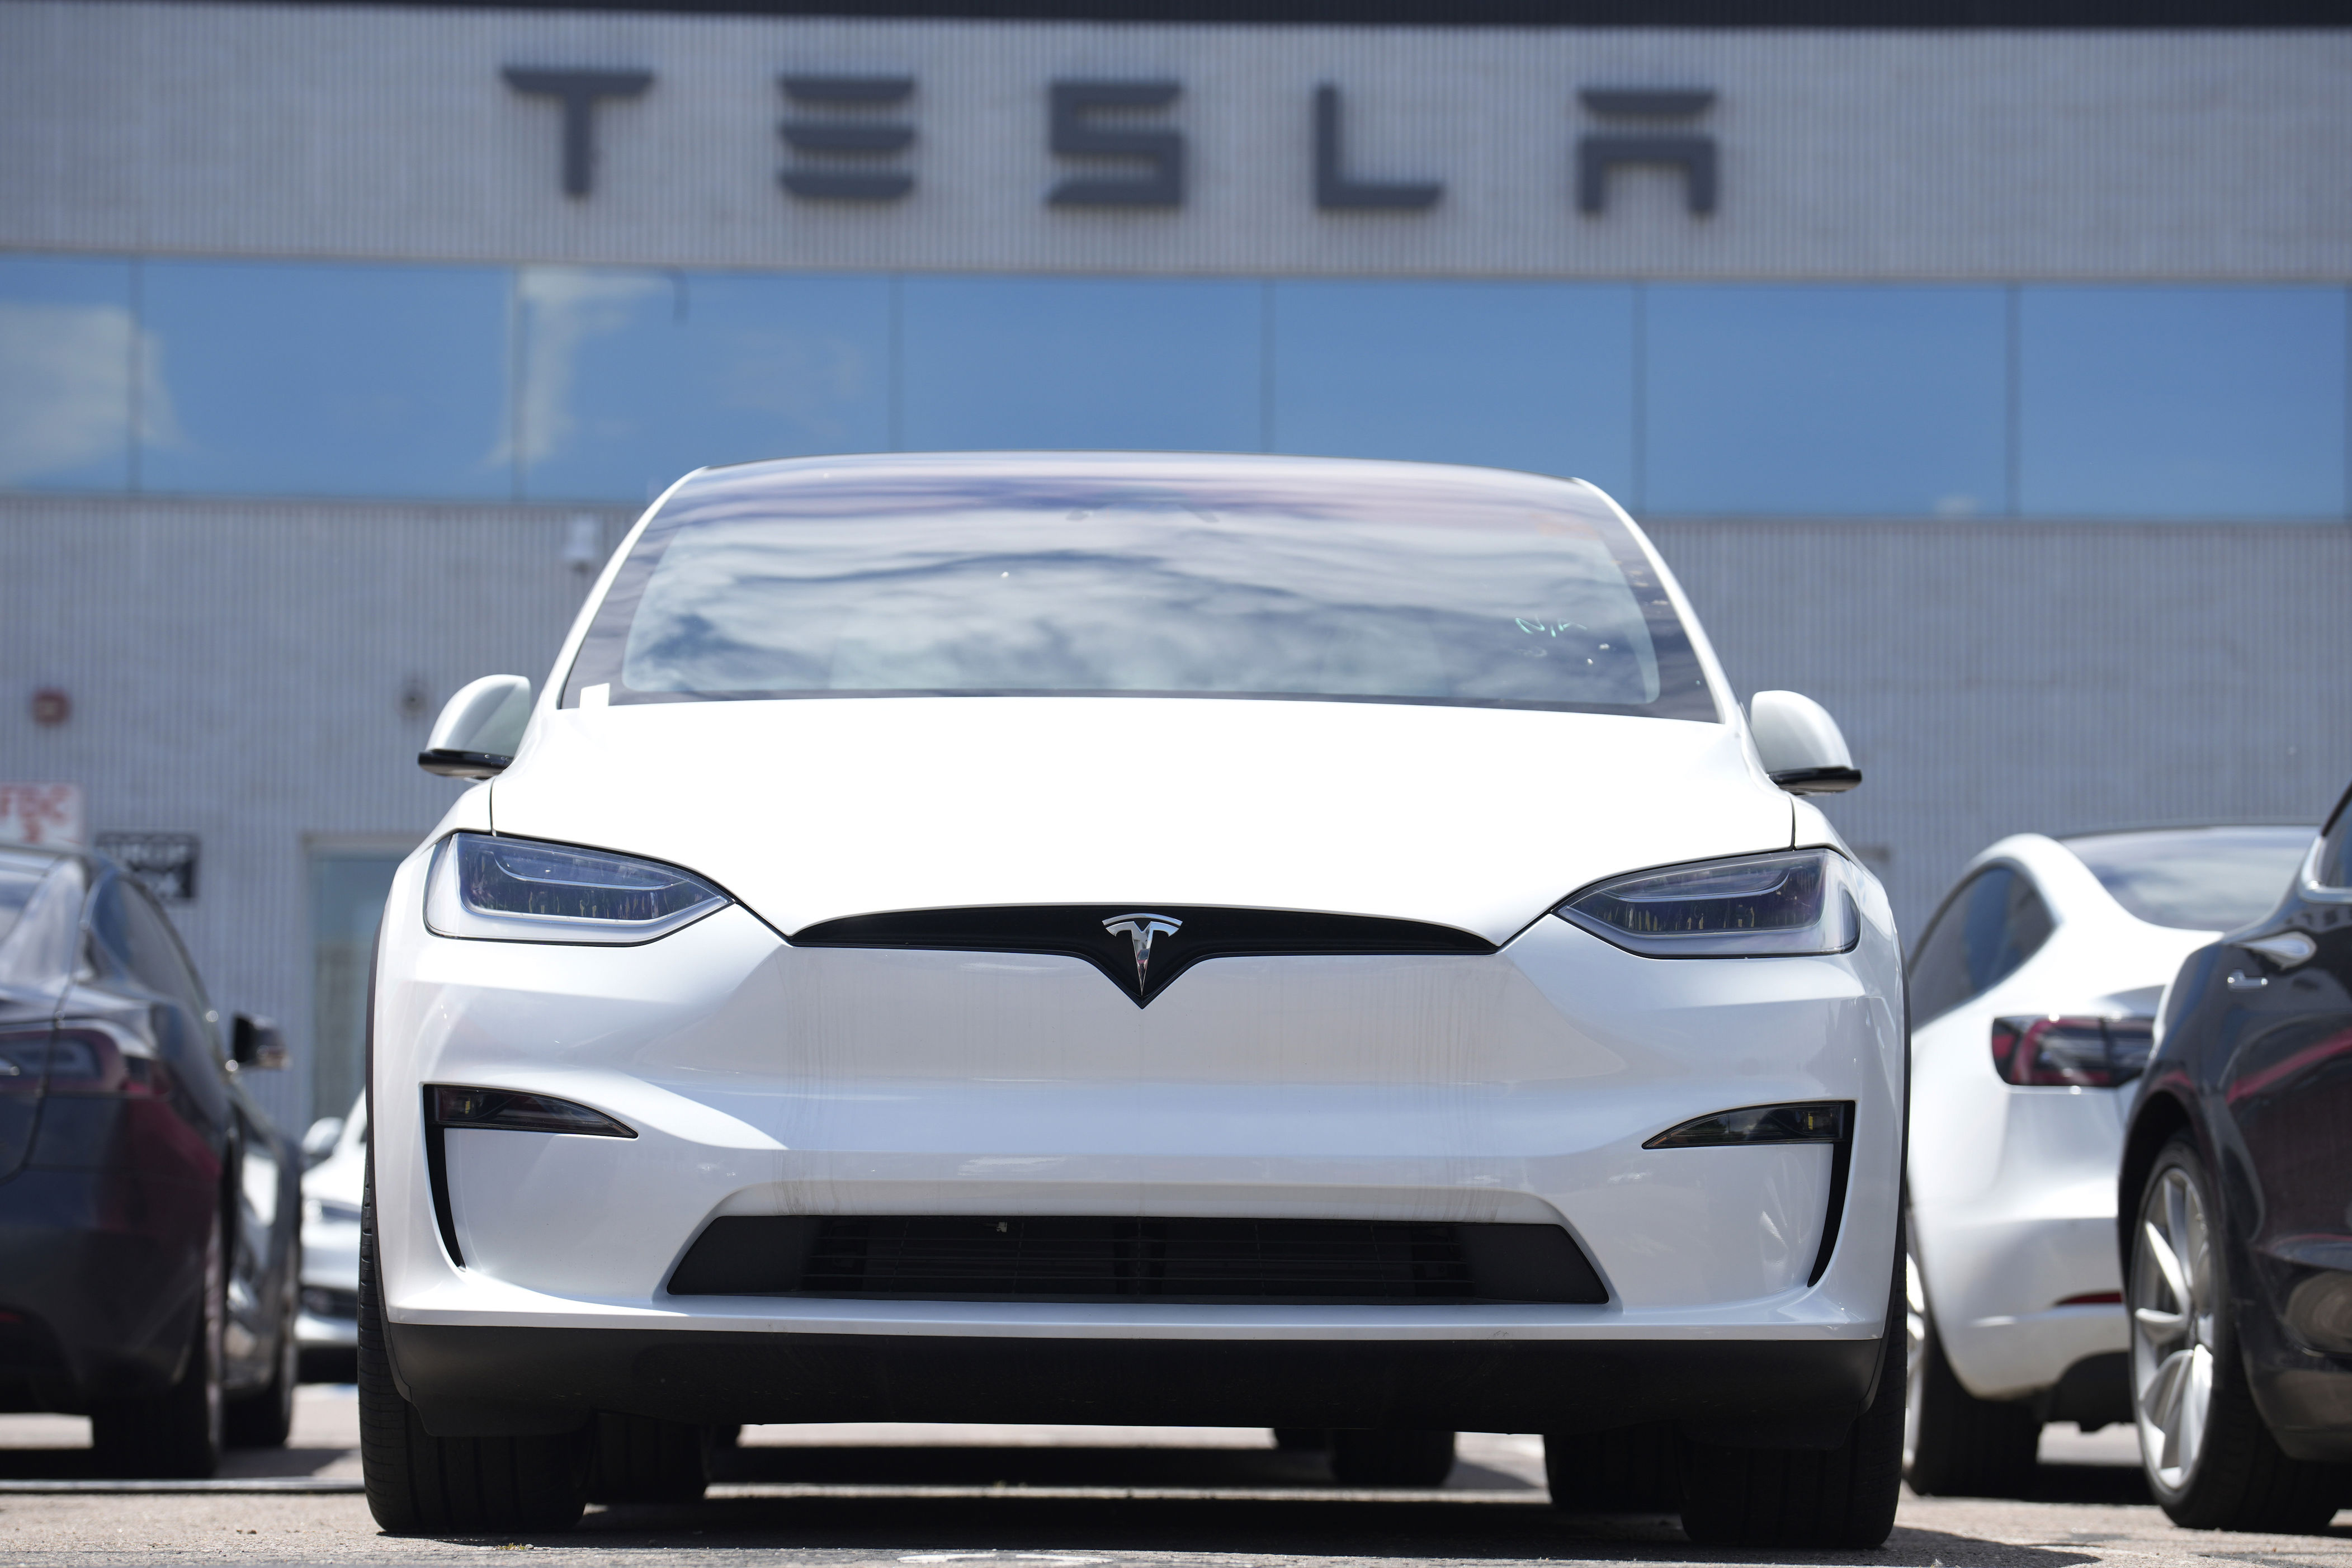 tesla cuts us prices for 3 of its electric vehicle models after a difficult week